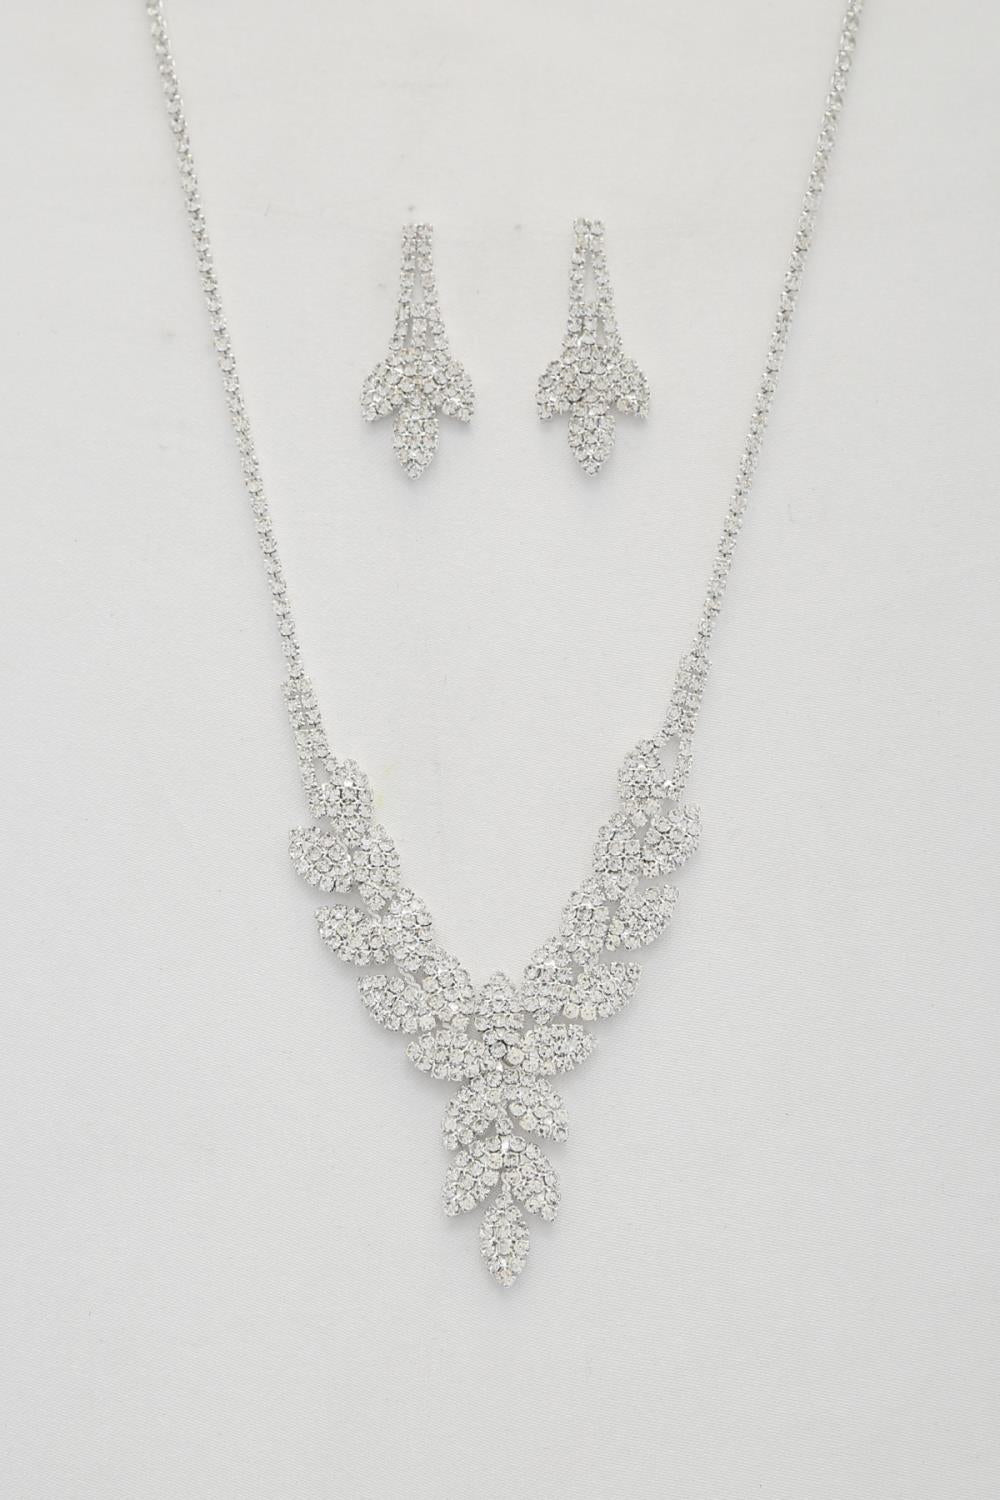 Leaf Pattern Crystal Necklace - Love It Clothing